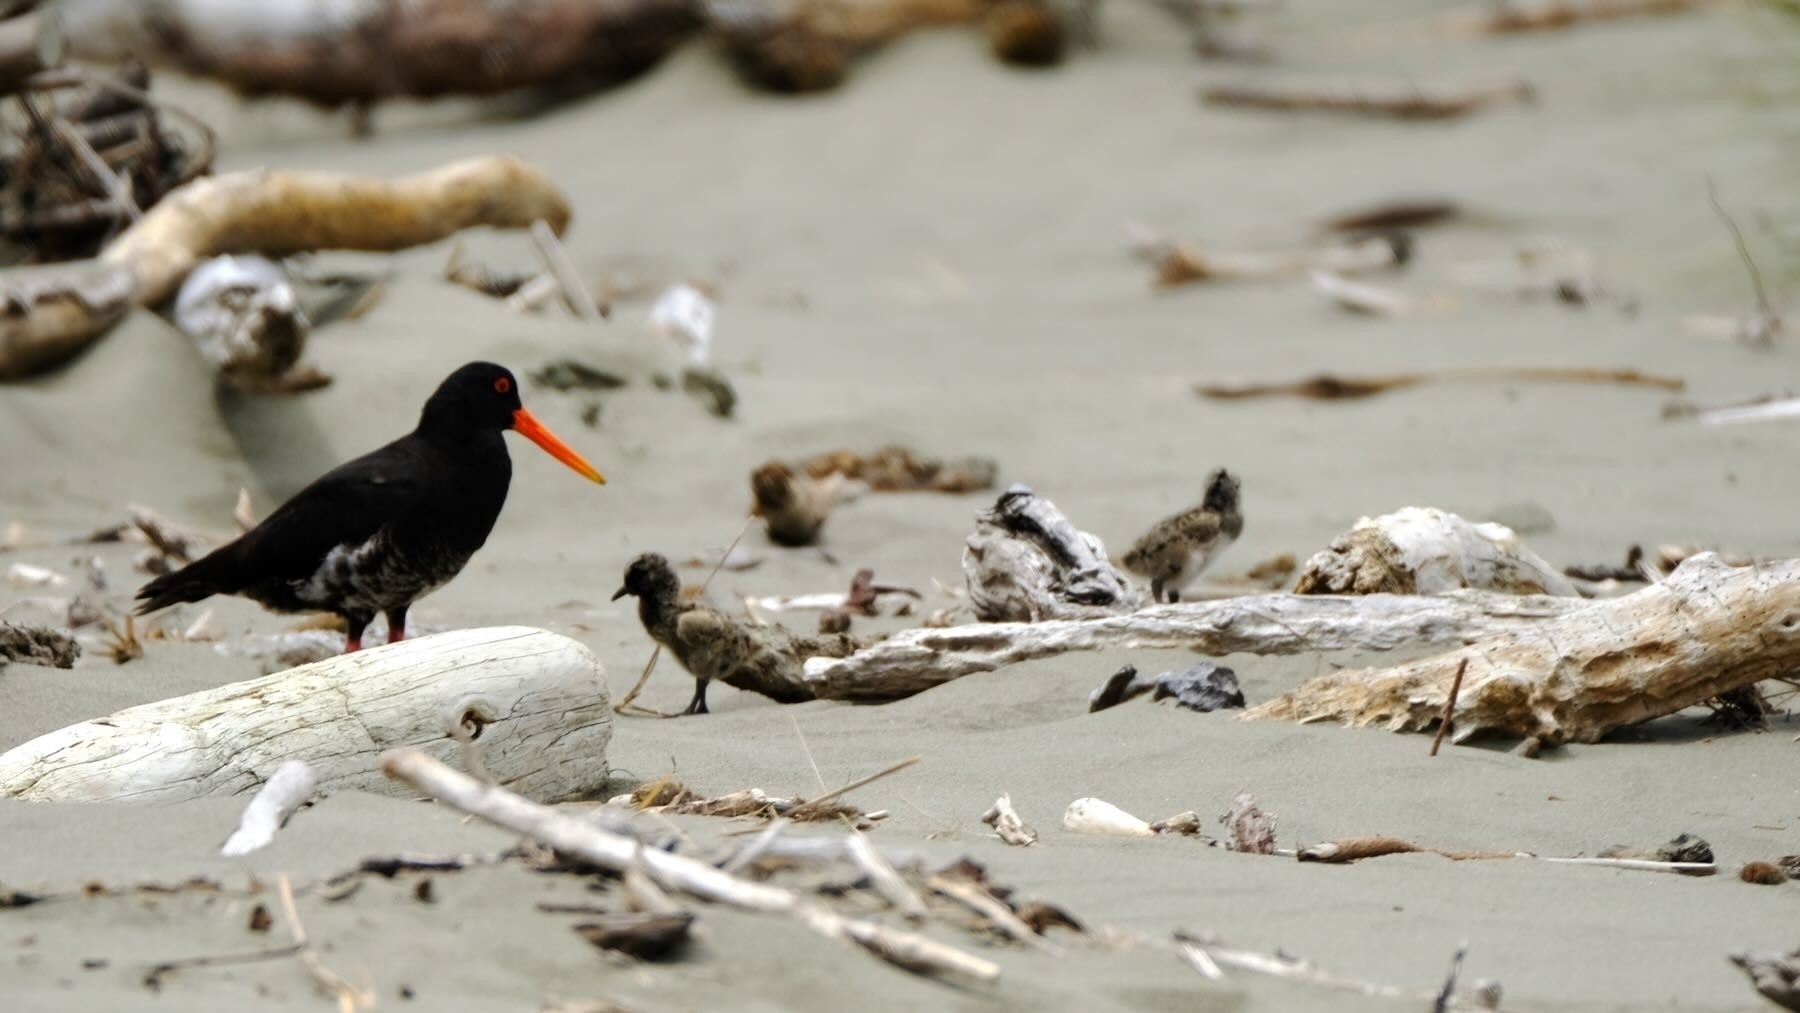 Adult Oystercatcher with 2 chicks, on sand amongst driftwood. 